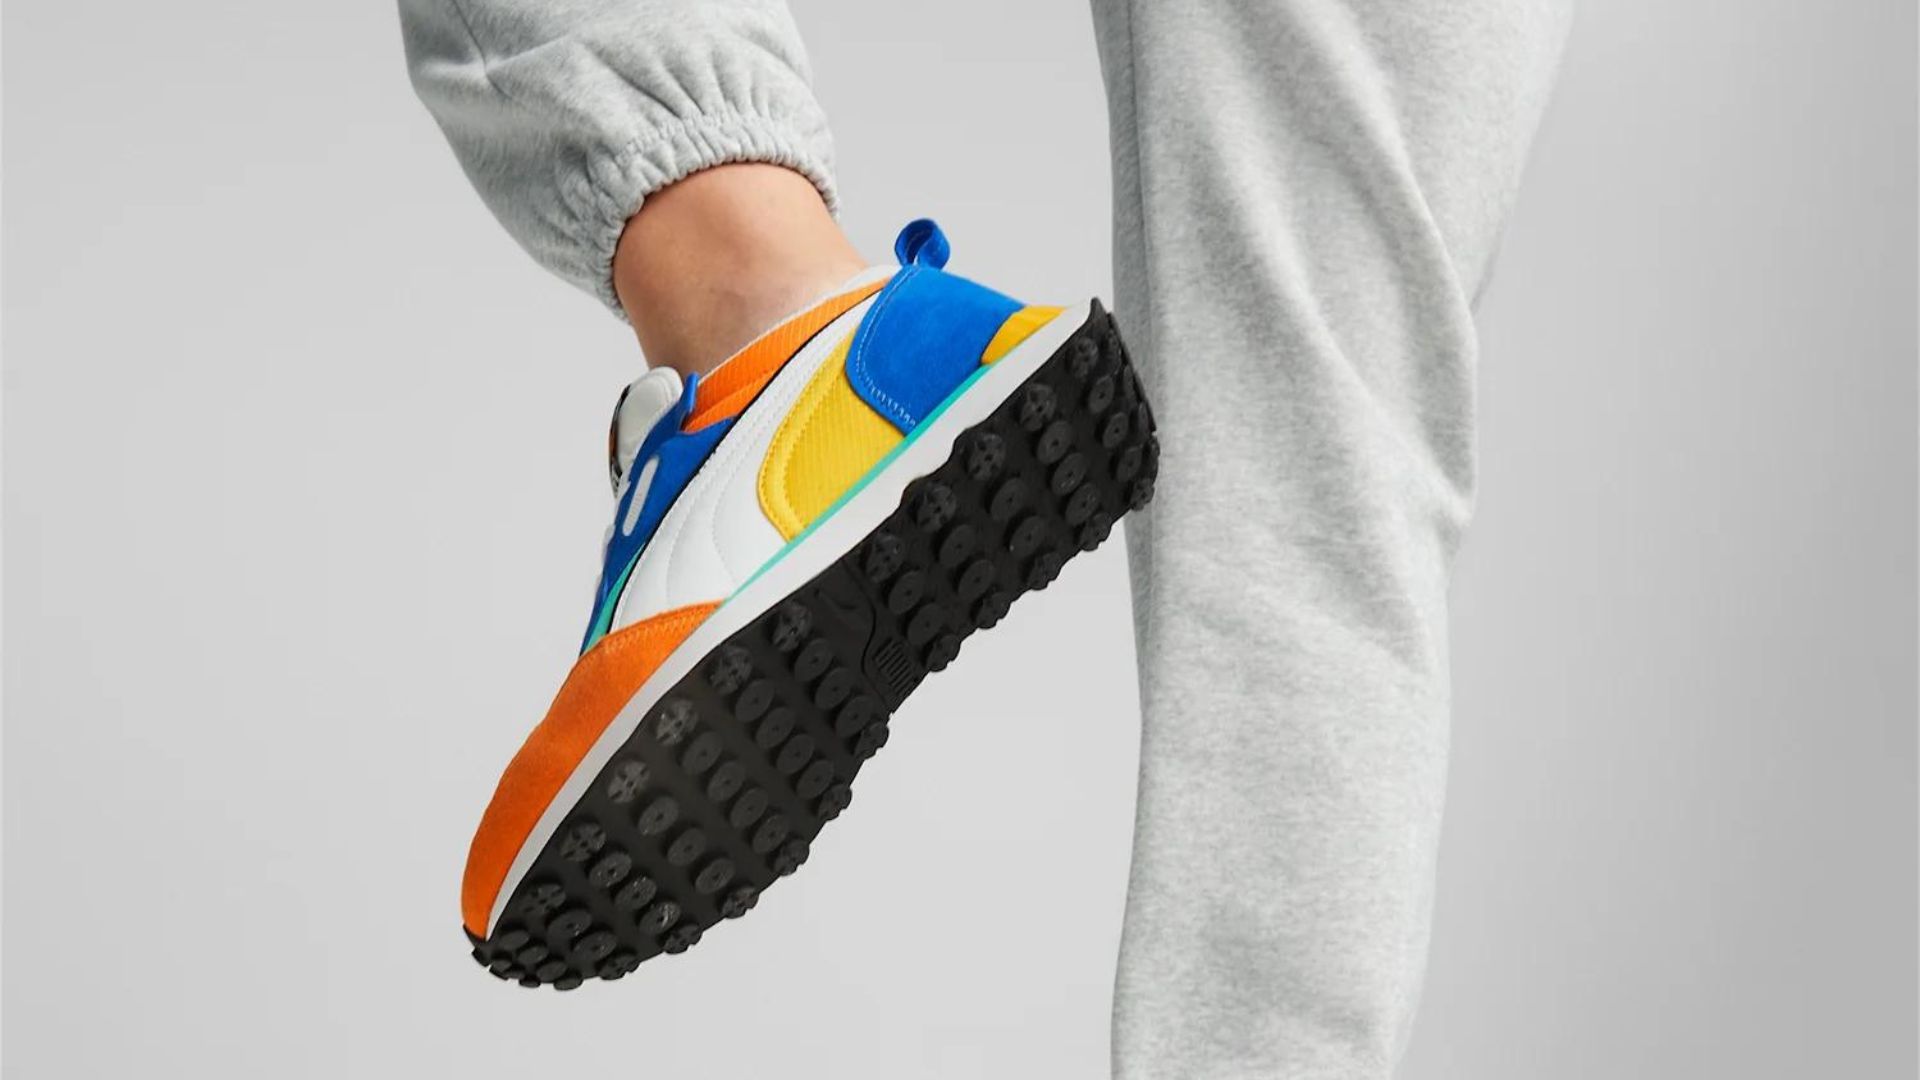 Virgil Abloh's first all-original Nike design is here to impress!